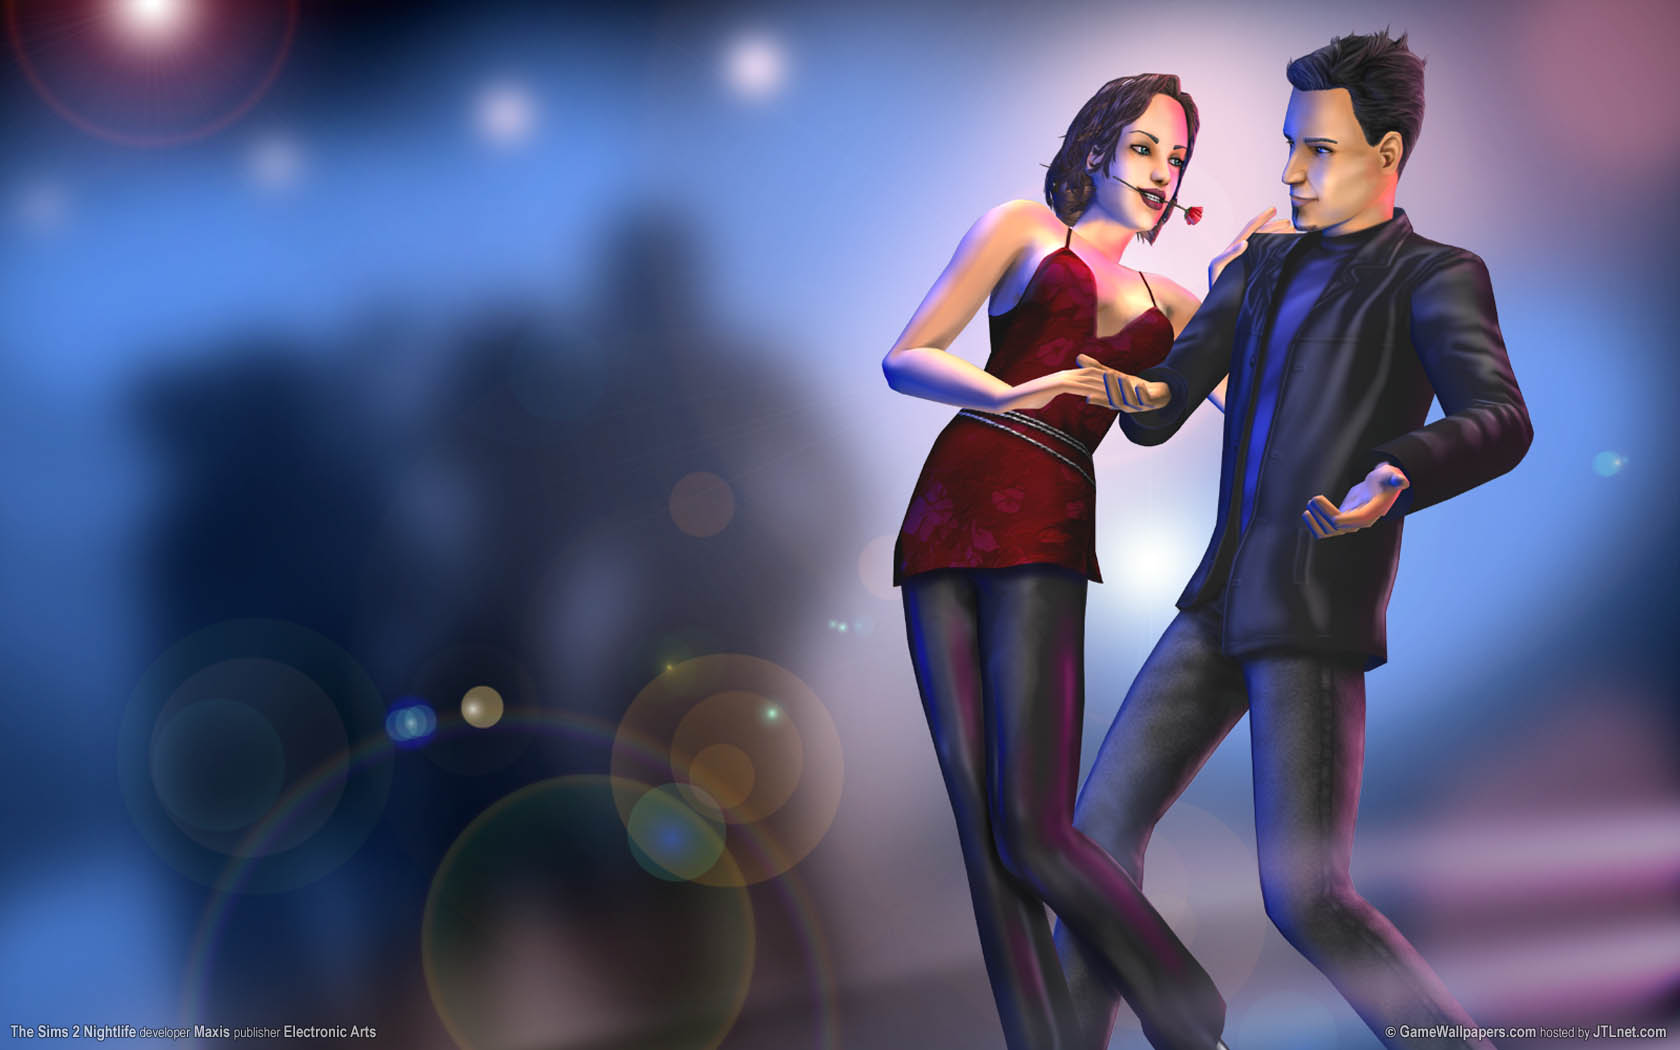 The Sims 2 Nightlife wallpaper 01 1680x1050